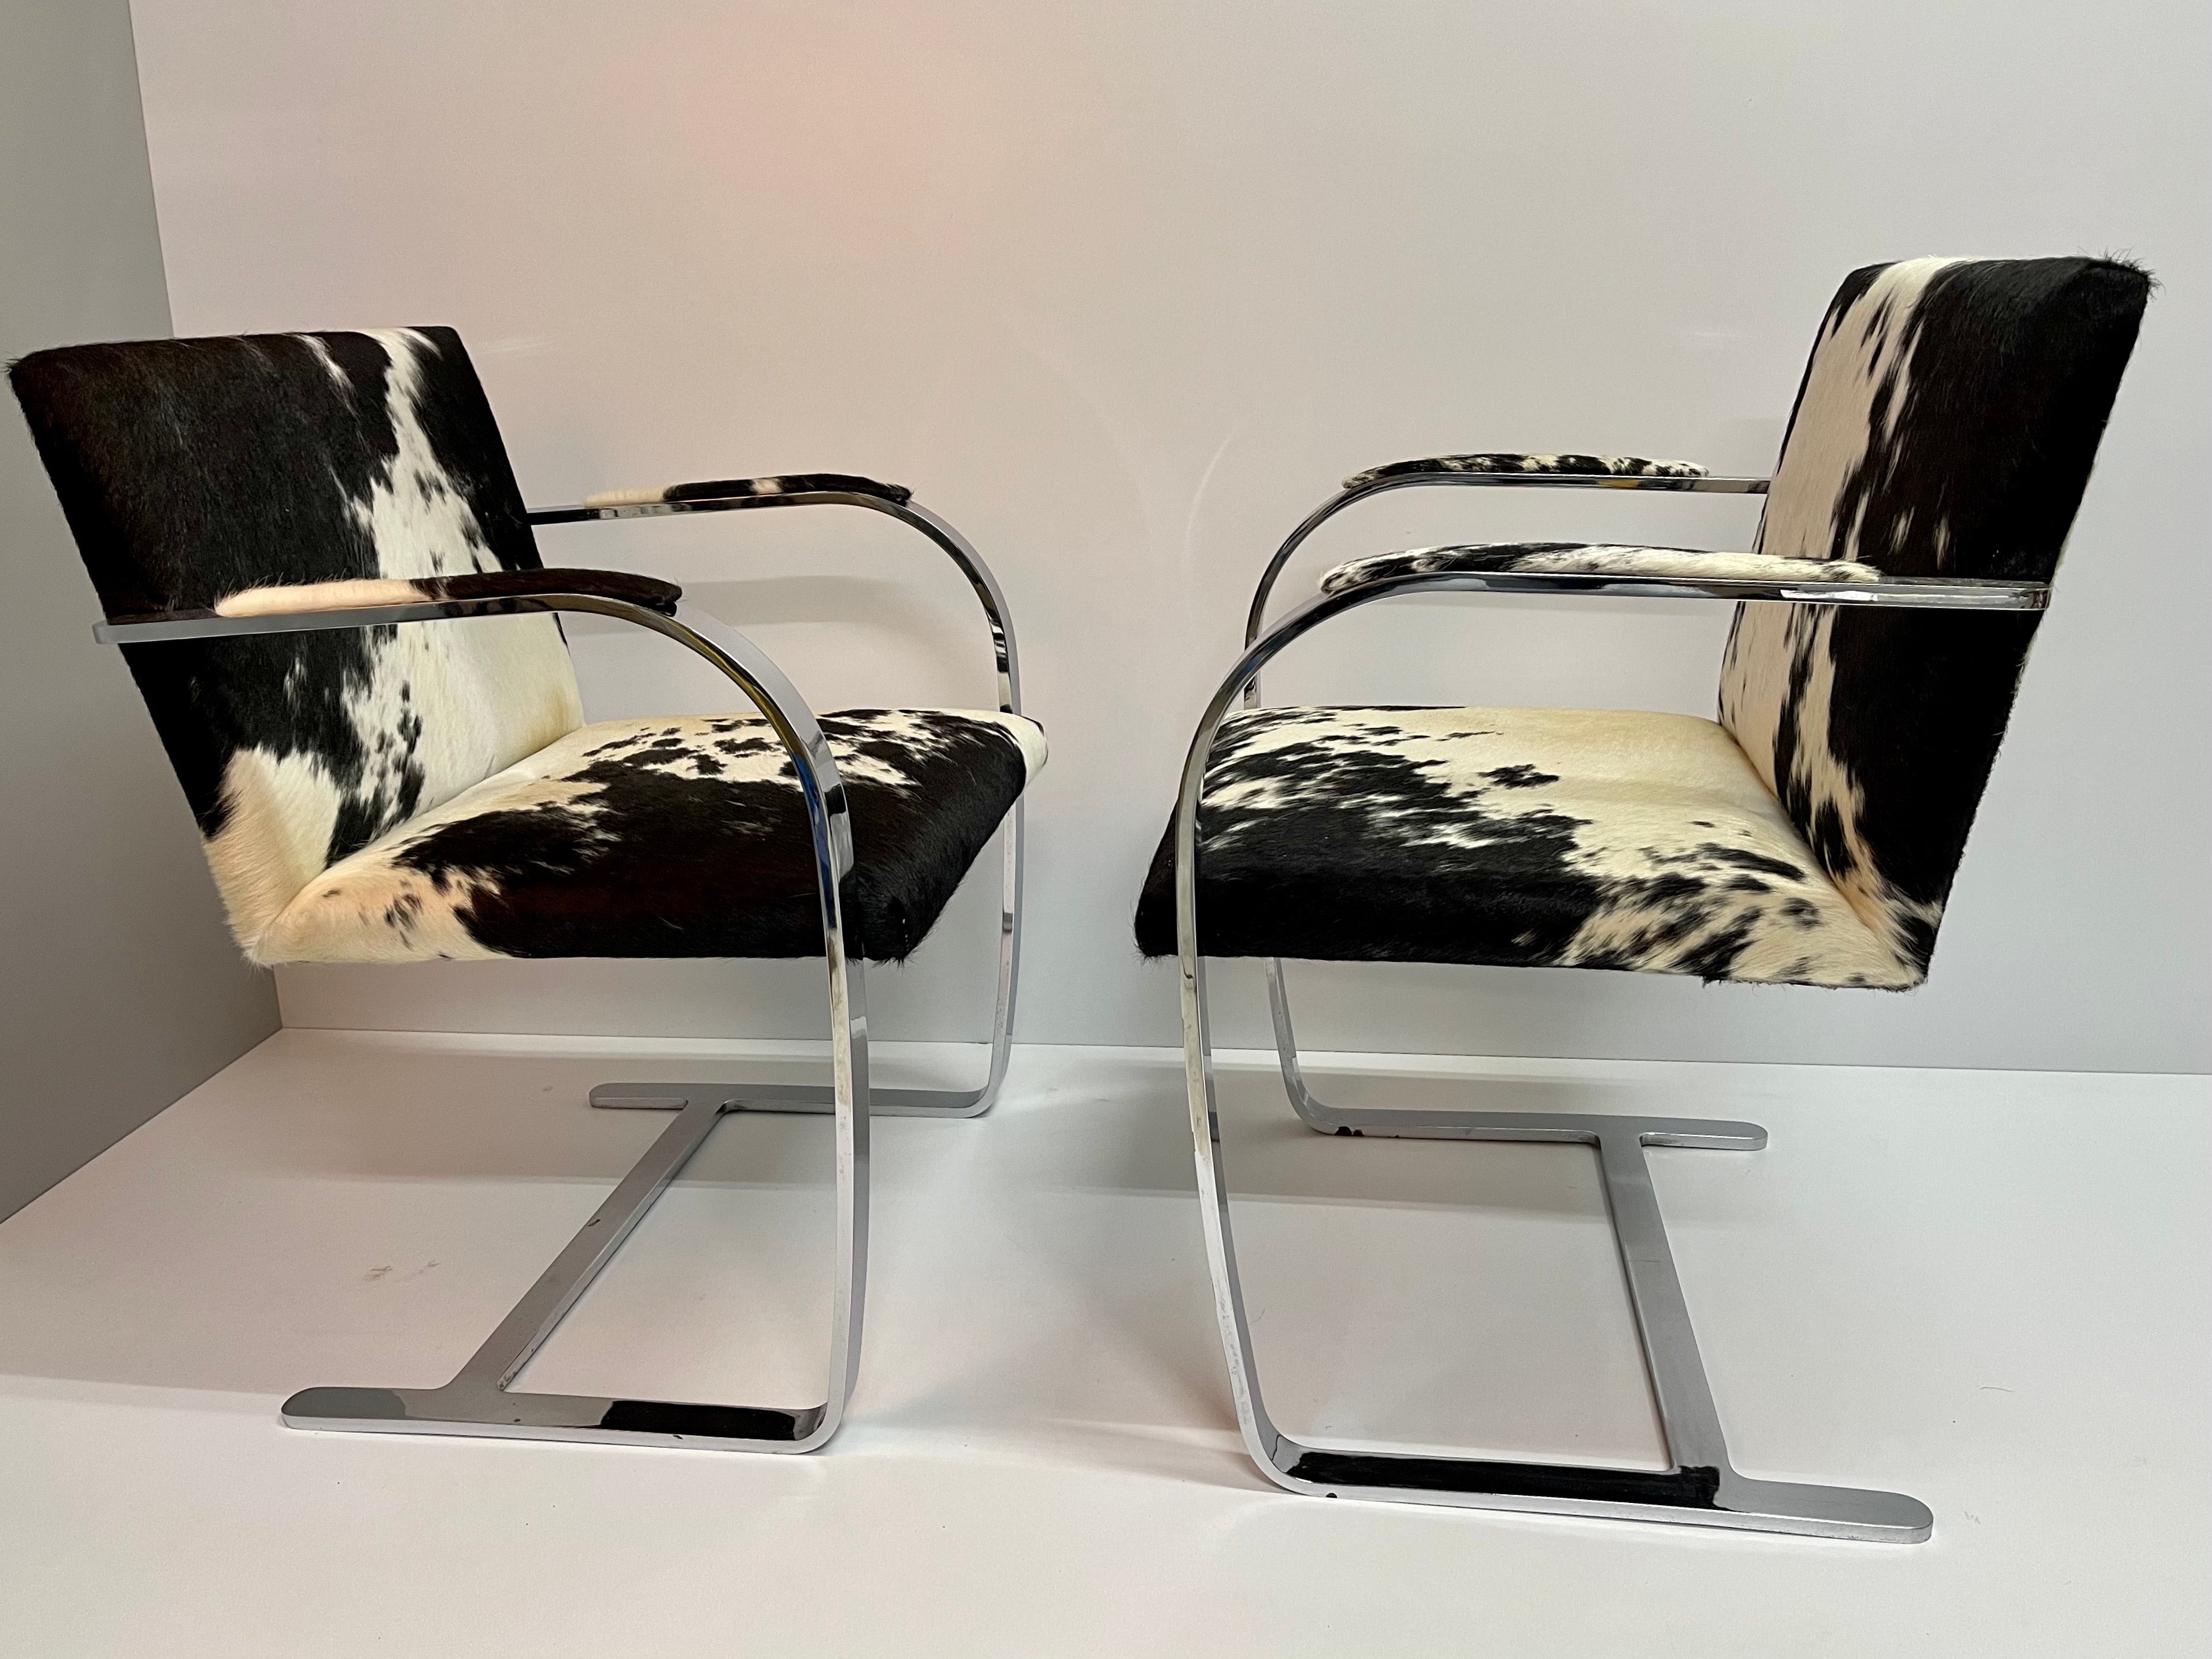 This pair of chairs belonged to the office of the finance director of the corporate Nylon de Mexico (now Akra Polyester), his grandson, who is my friend, did me the favor of selling them to me. In the early 1960s, the project was commissioned to